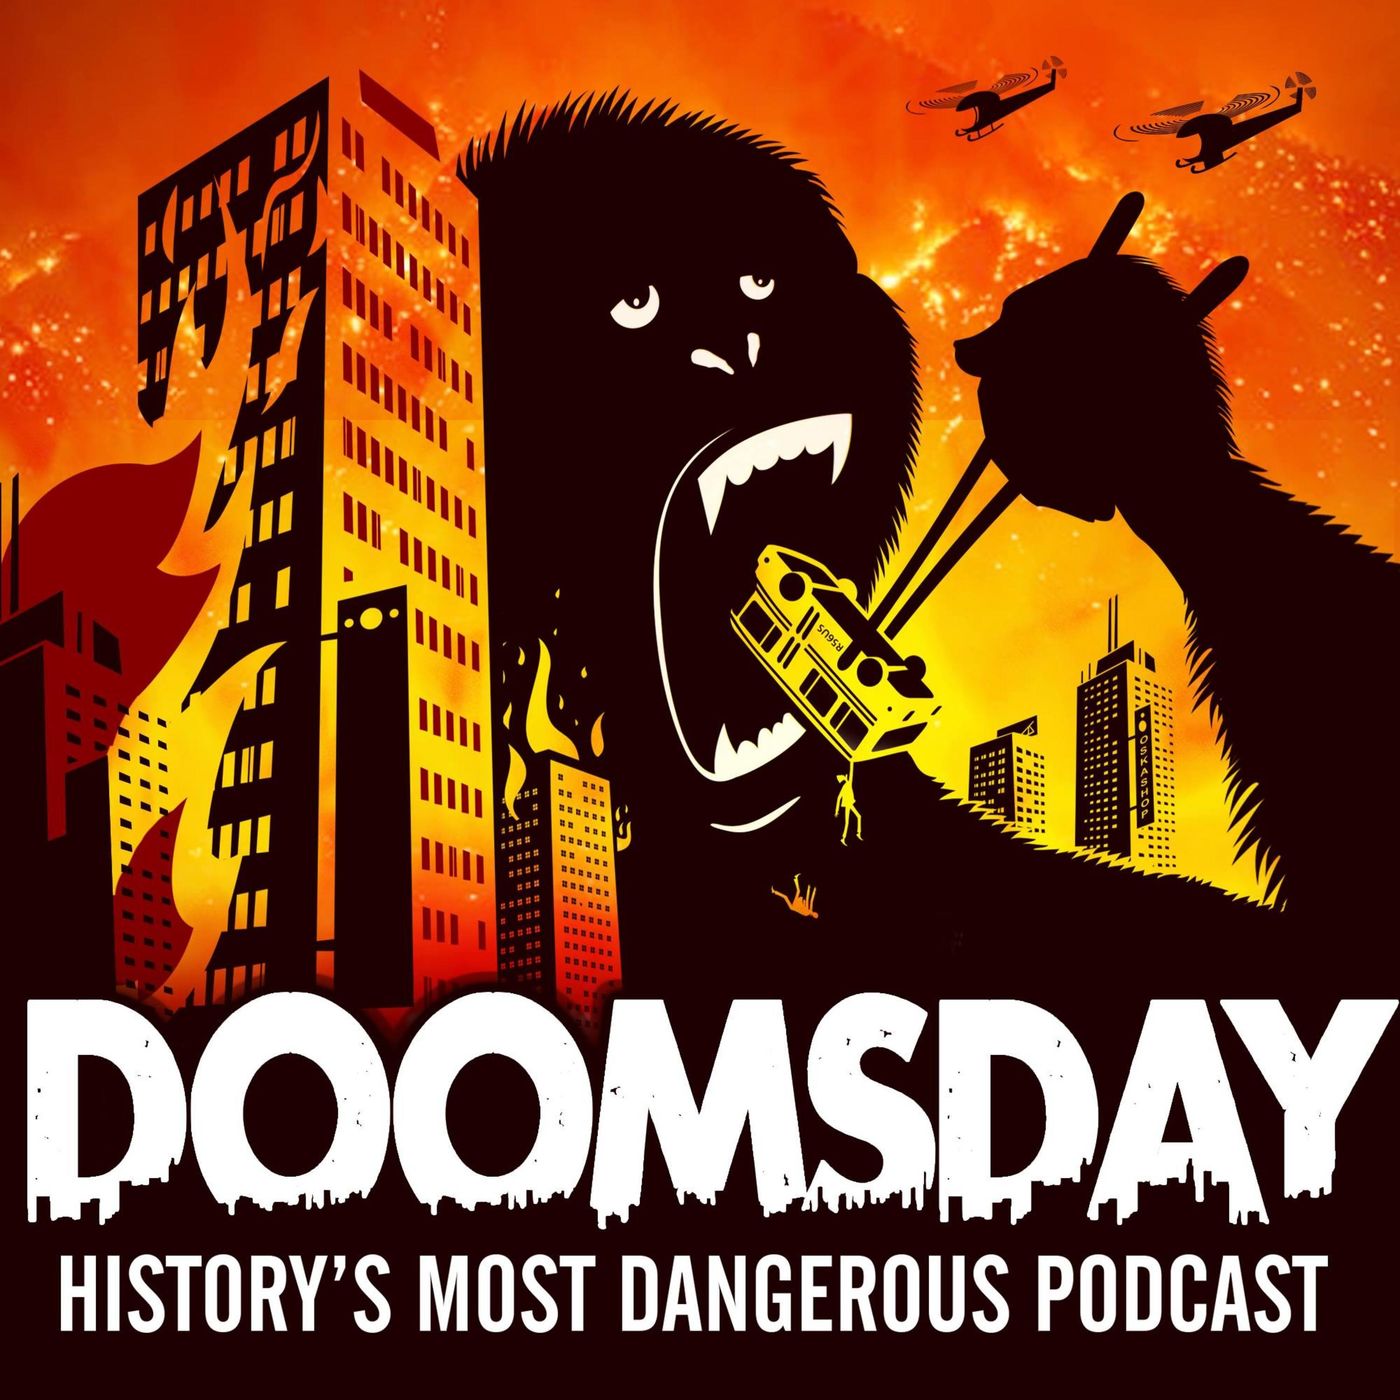 Doomsday: History's Most Dangerous Podcast Trailer